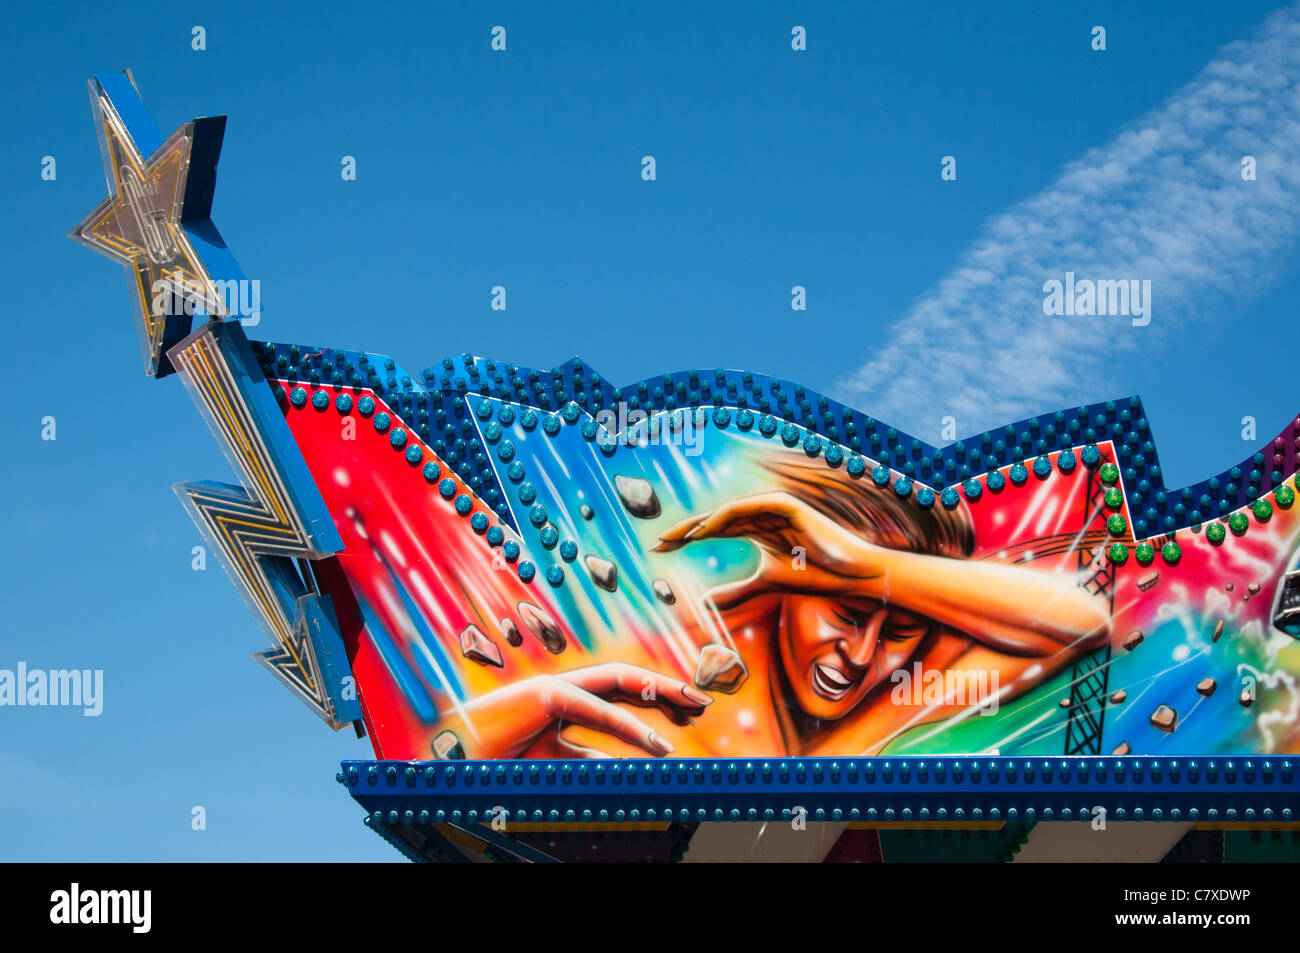 Stuttgart, Germany – September 25, 2011: Very colorful and artistic decoration at a fun fair attraction at the Cannstatter Wasen Stock Photo